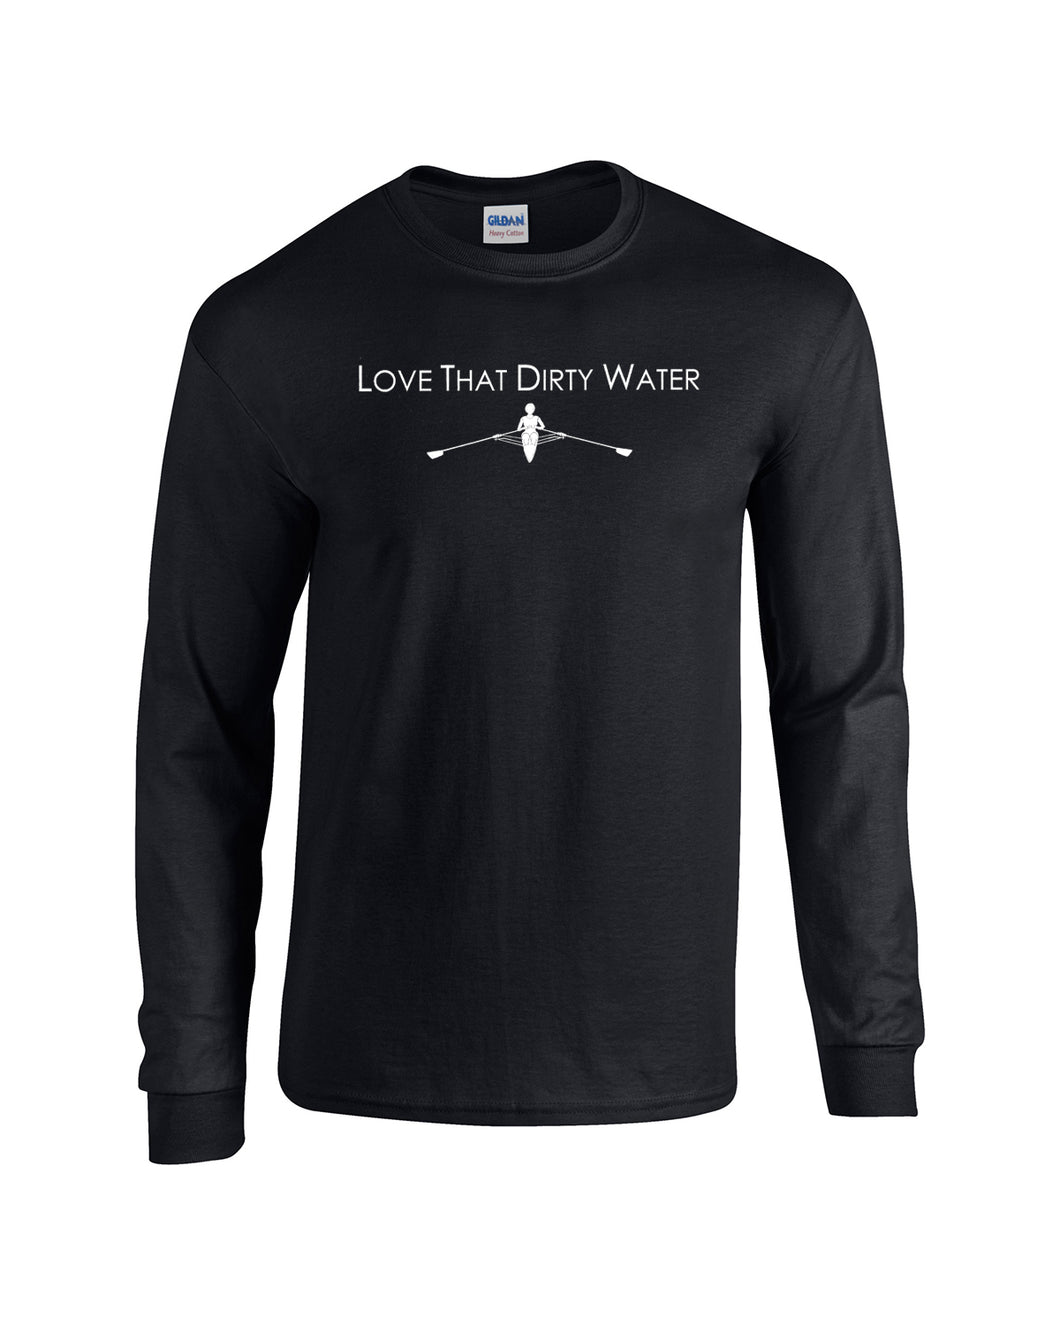 Cotton Long Sleeve Love That Dirty Water Black